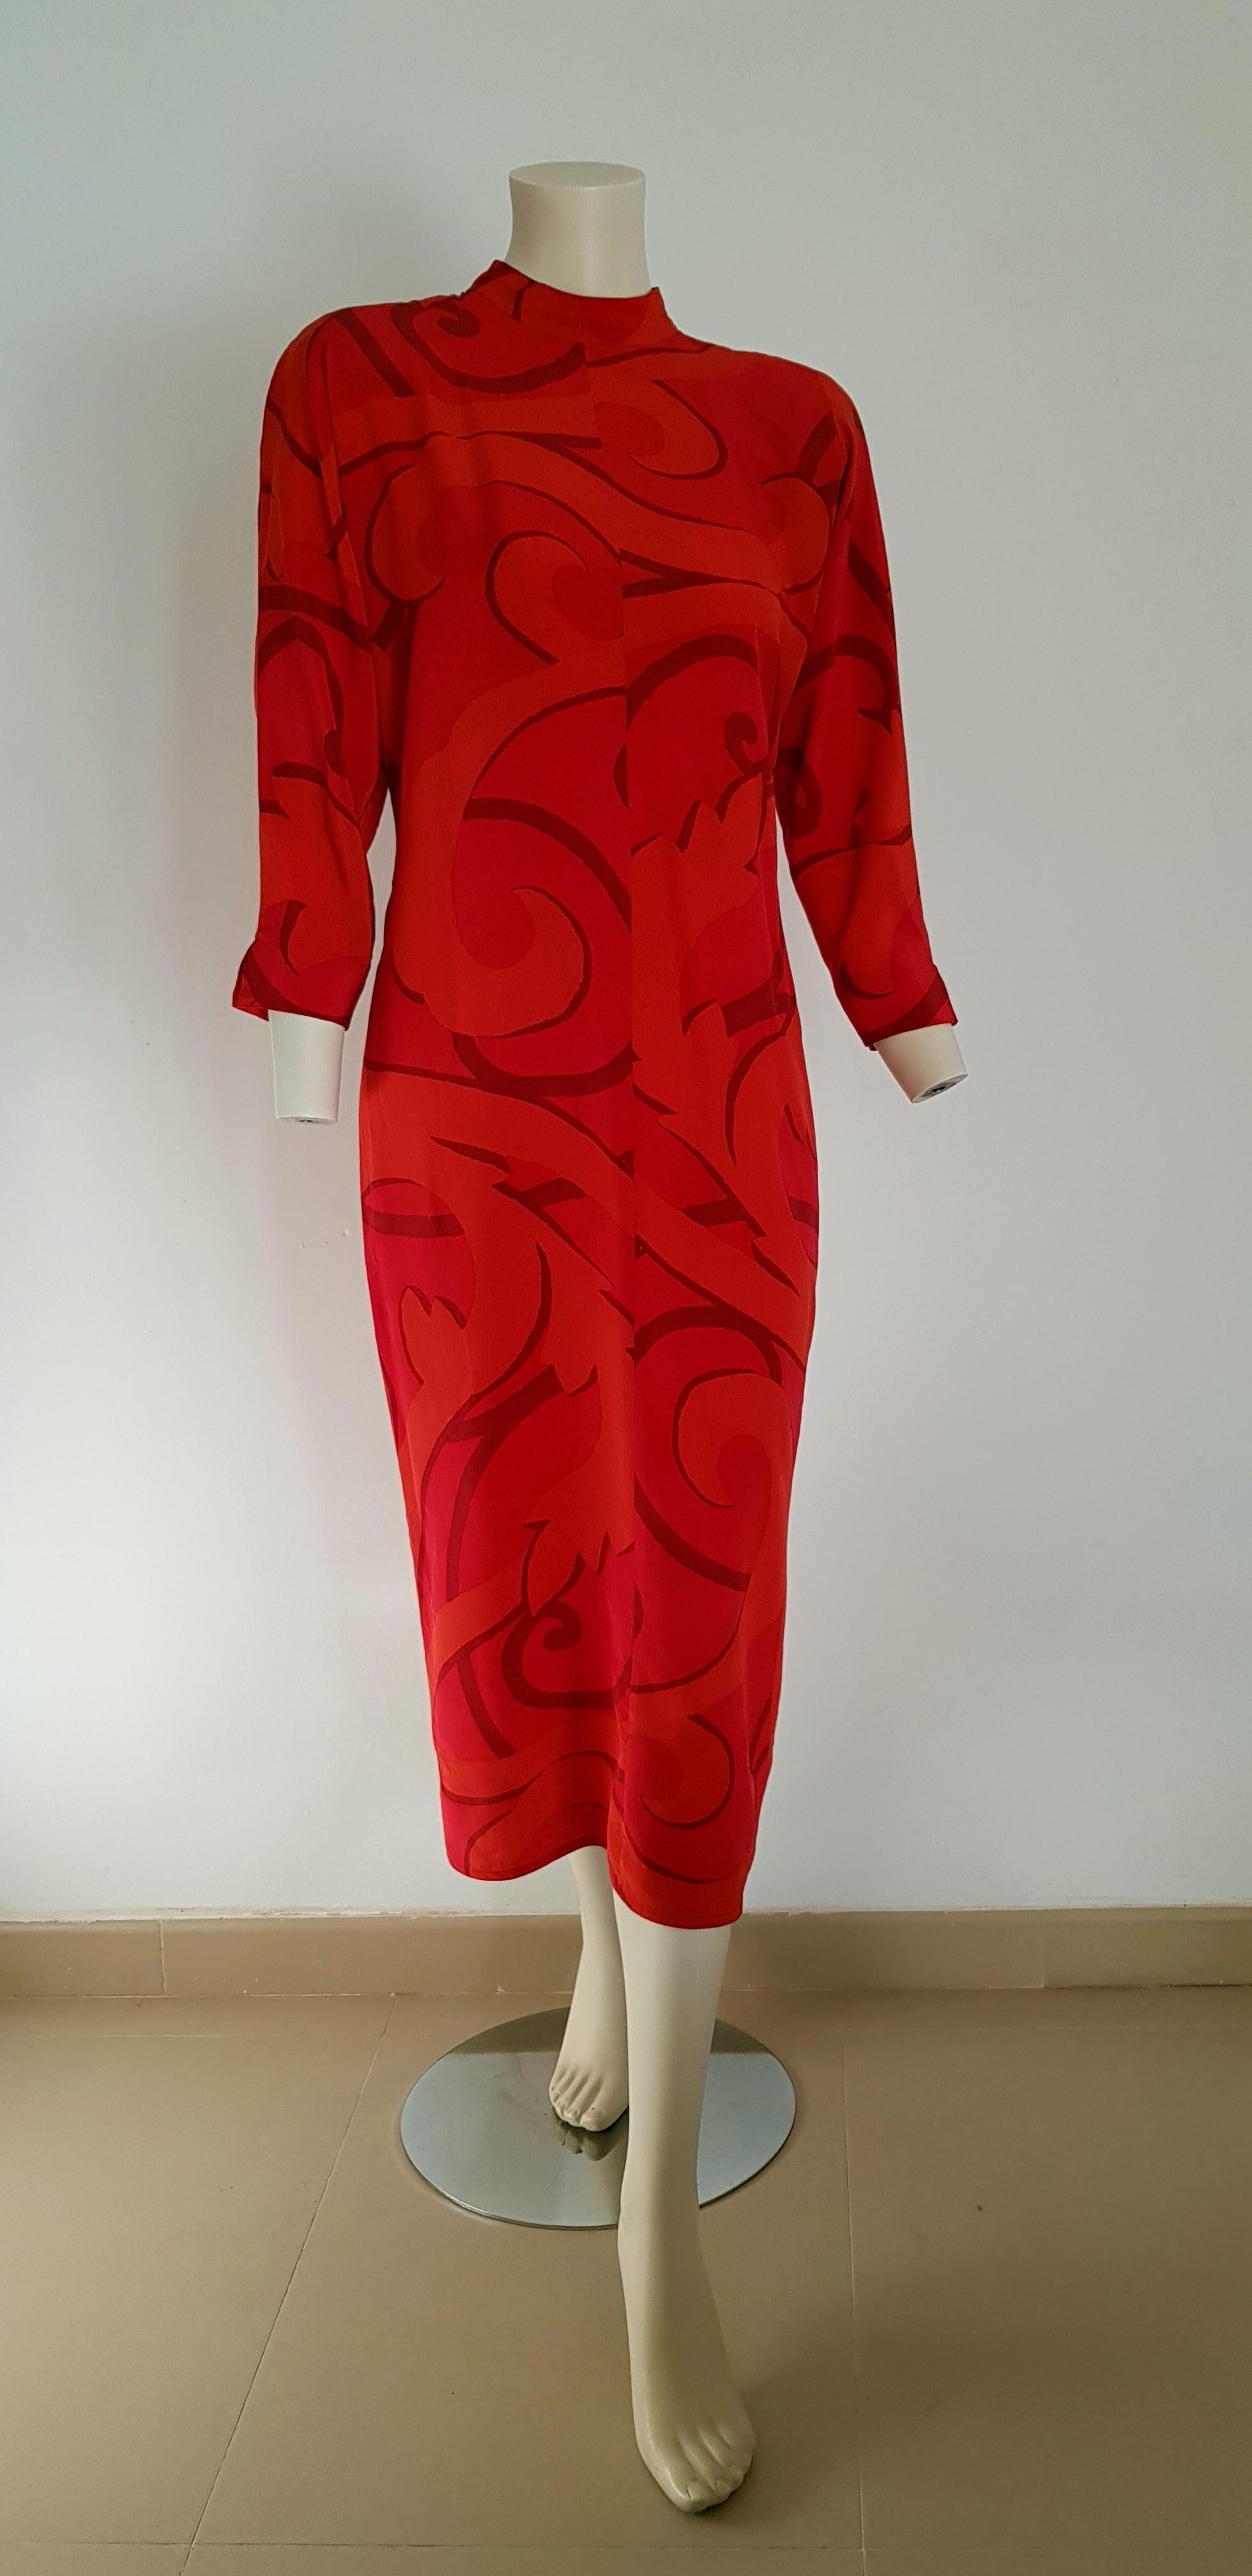 Gianfranco FERRÉ Couture Red Silk Dress with Skirt Foulard - Unworn For Sale 2